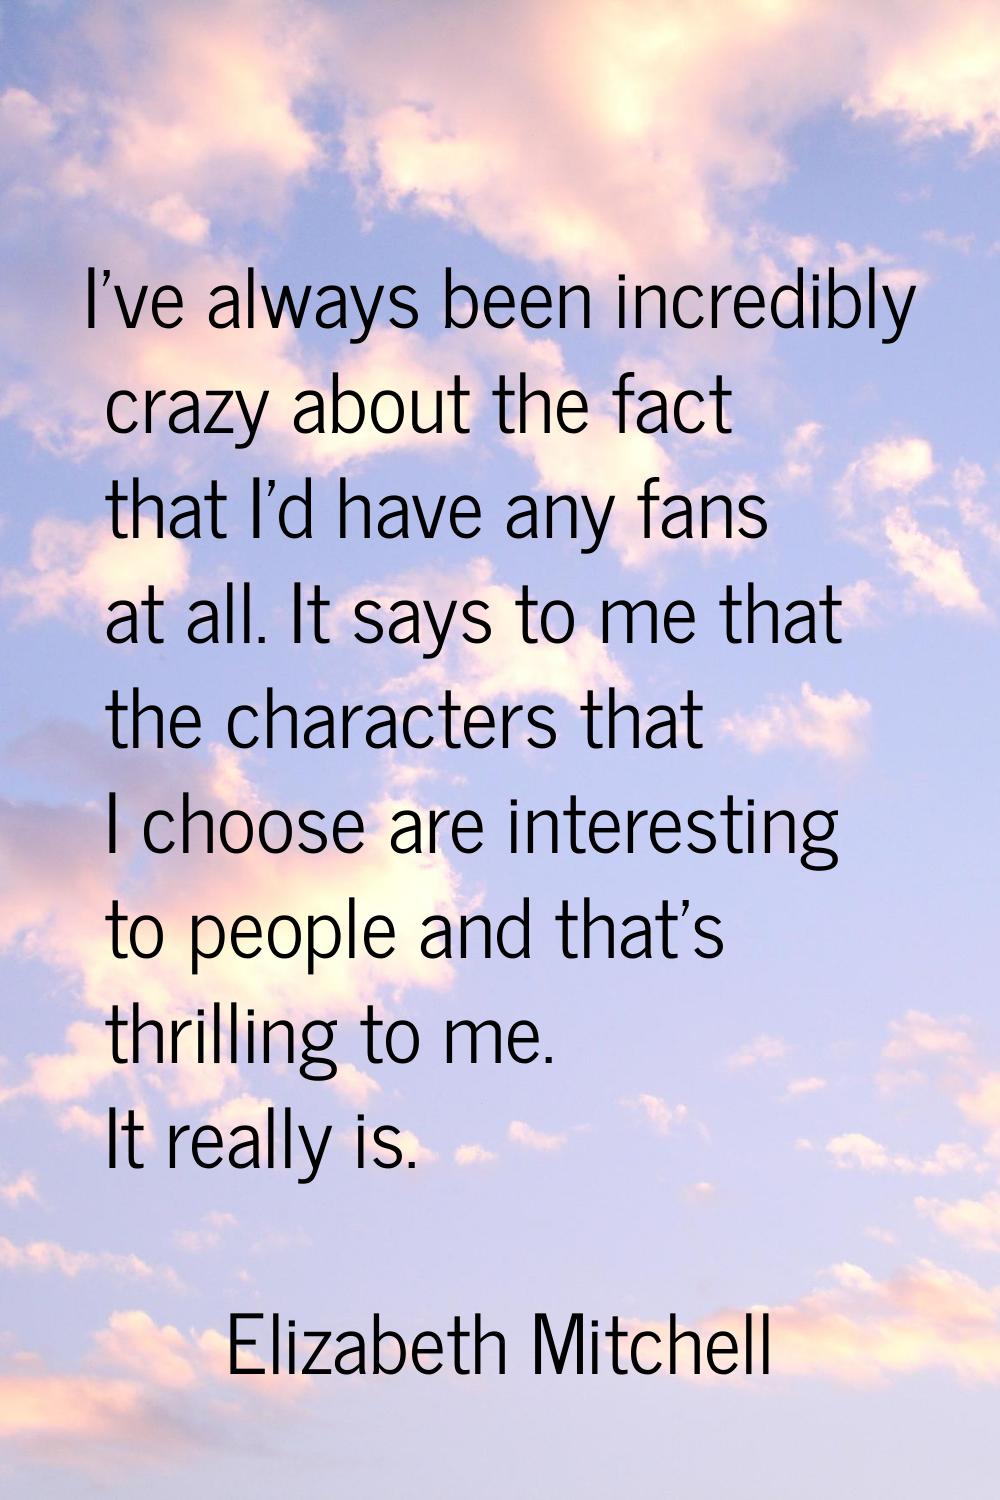 I've always been incredibly crazy about the fact that I'd have any fans at all. It says to me that 